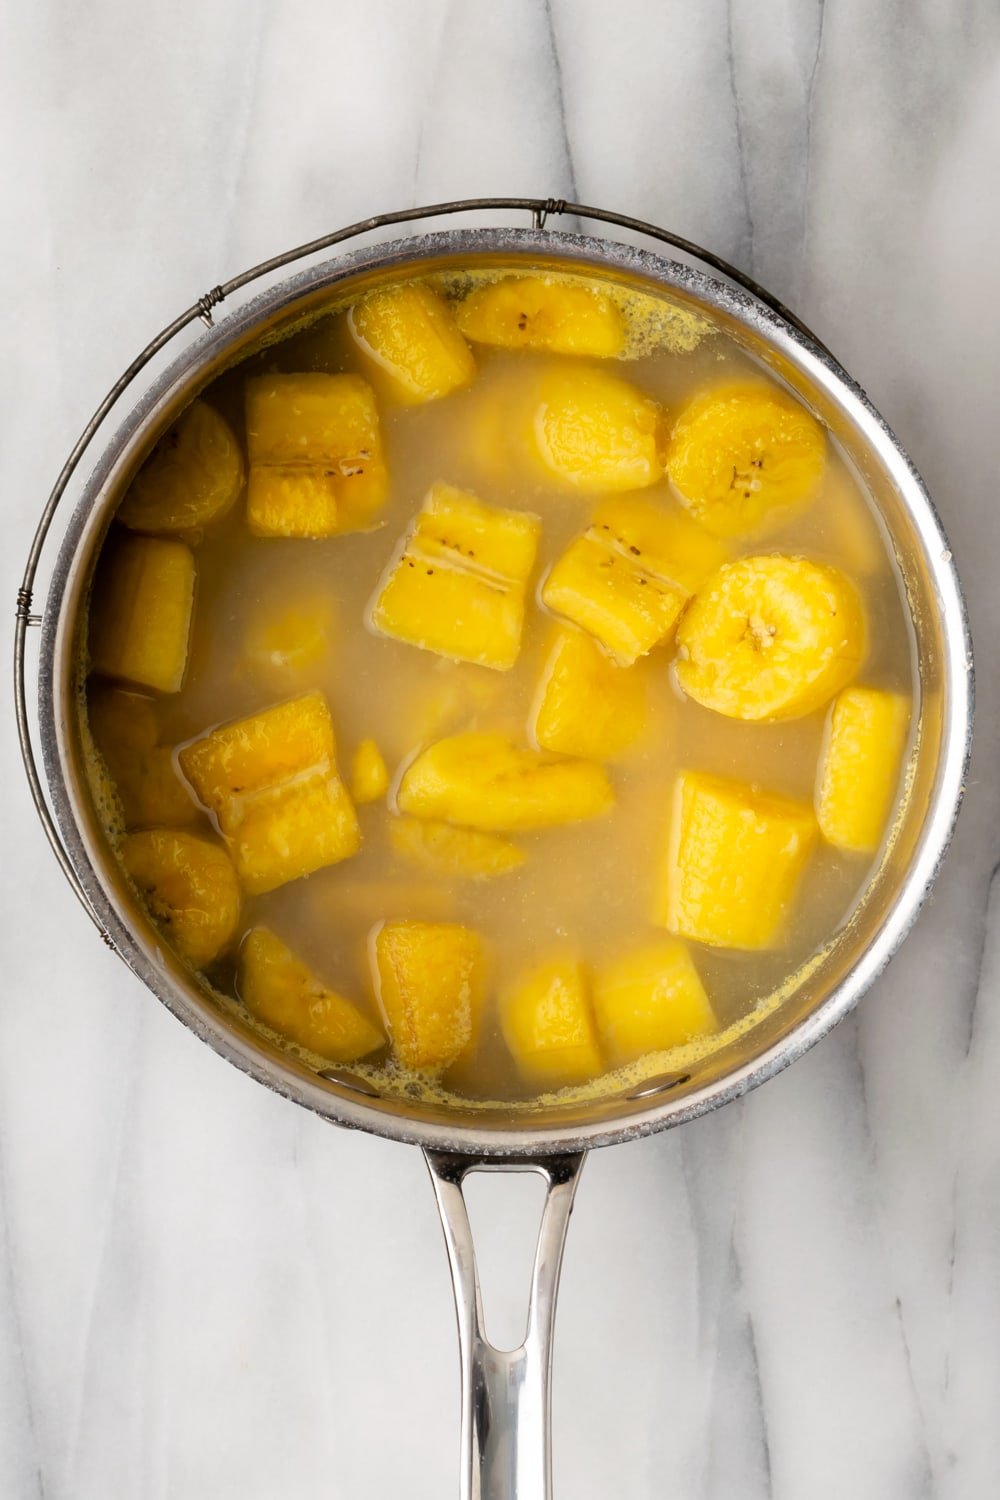 Boiled/softened sliced yellow and green plantains in a saucepan filled with water on a marble background.